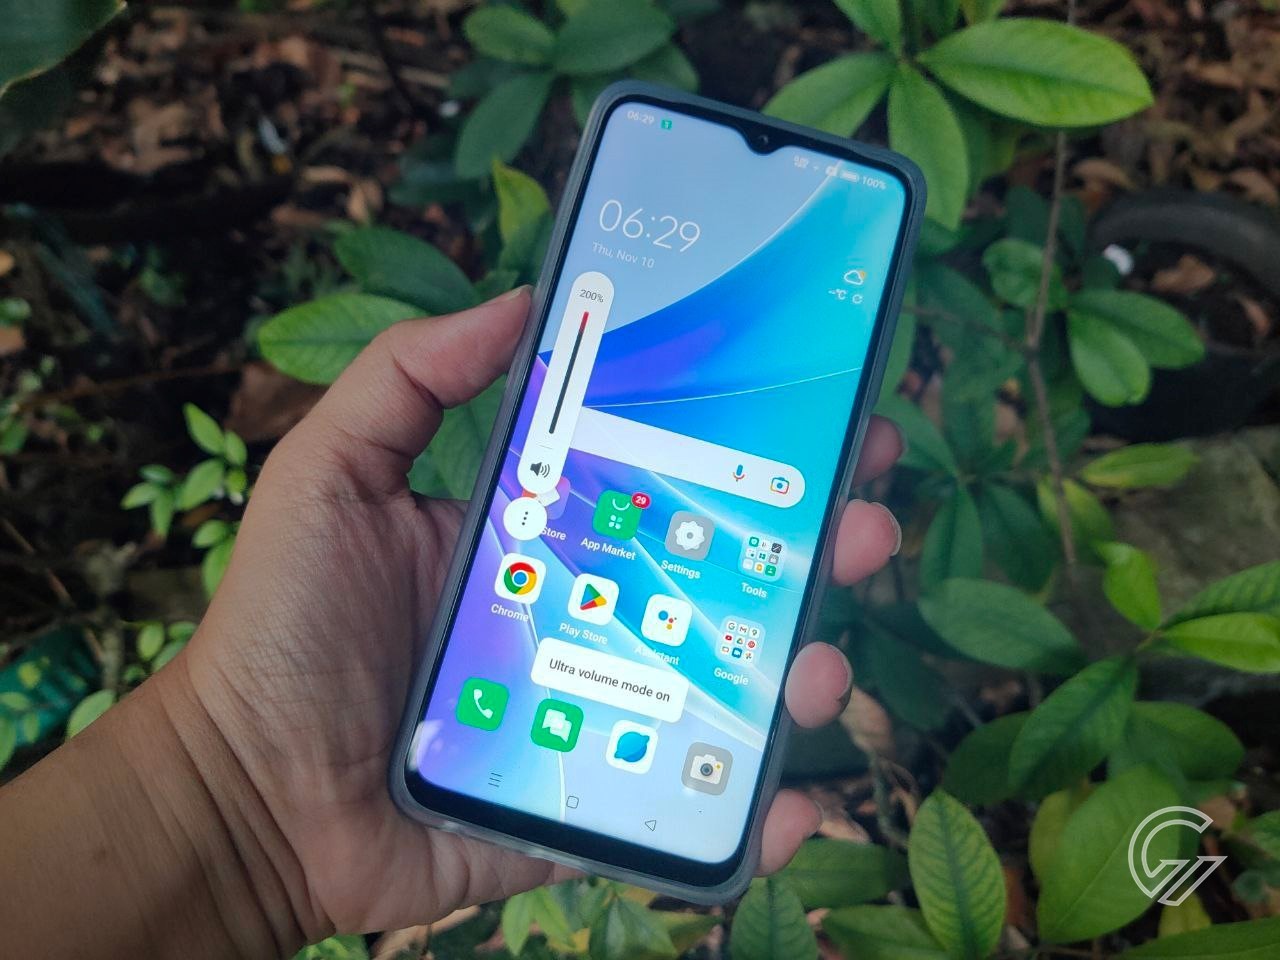 OPPO A77s Ultra Volume Feature